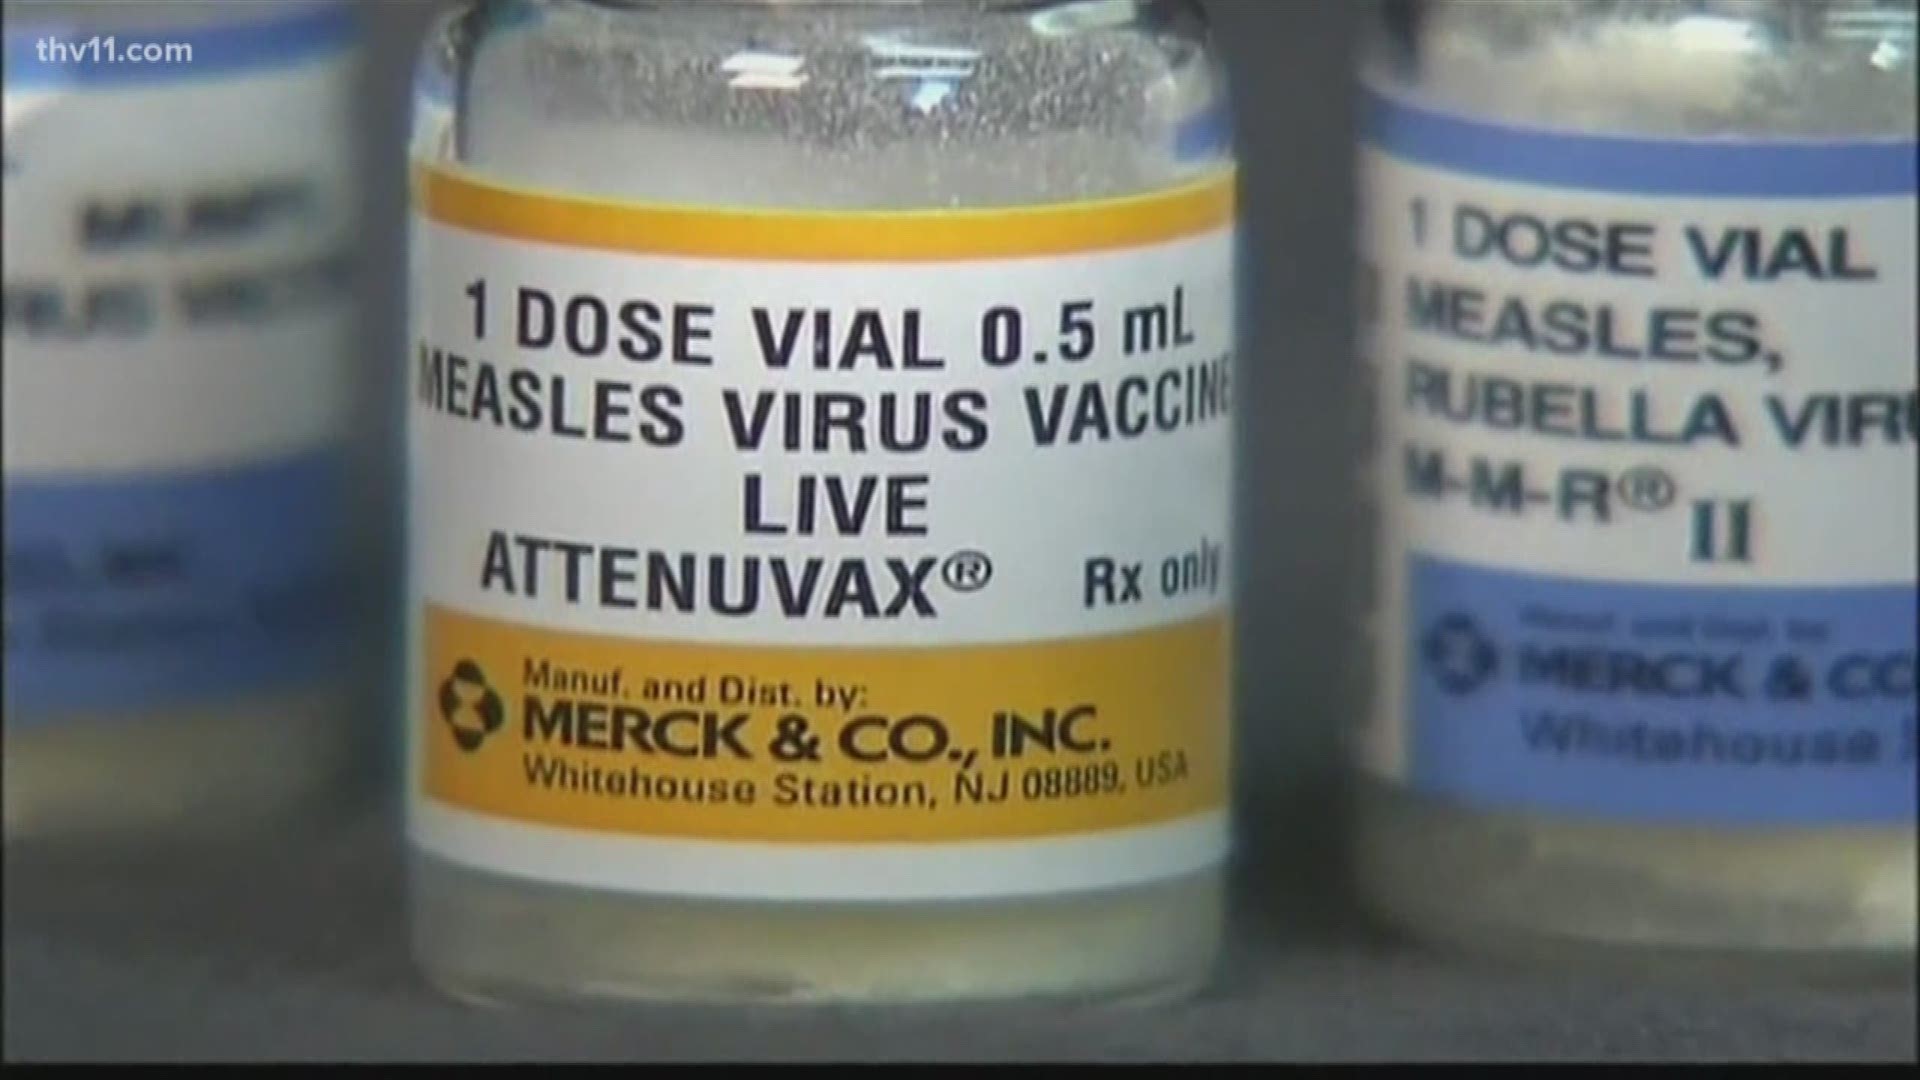 There's new data in the vaccination debate.